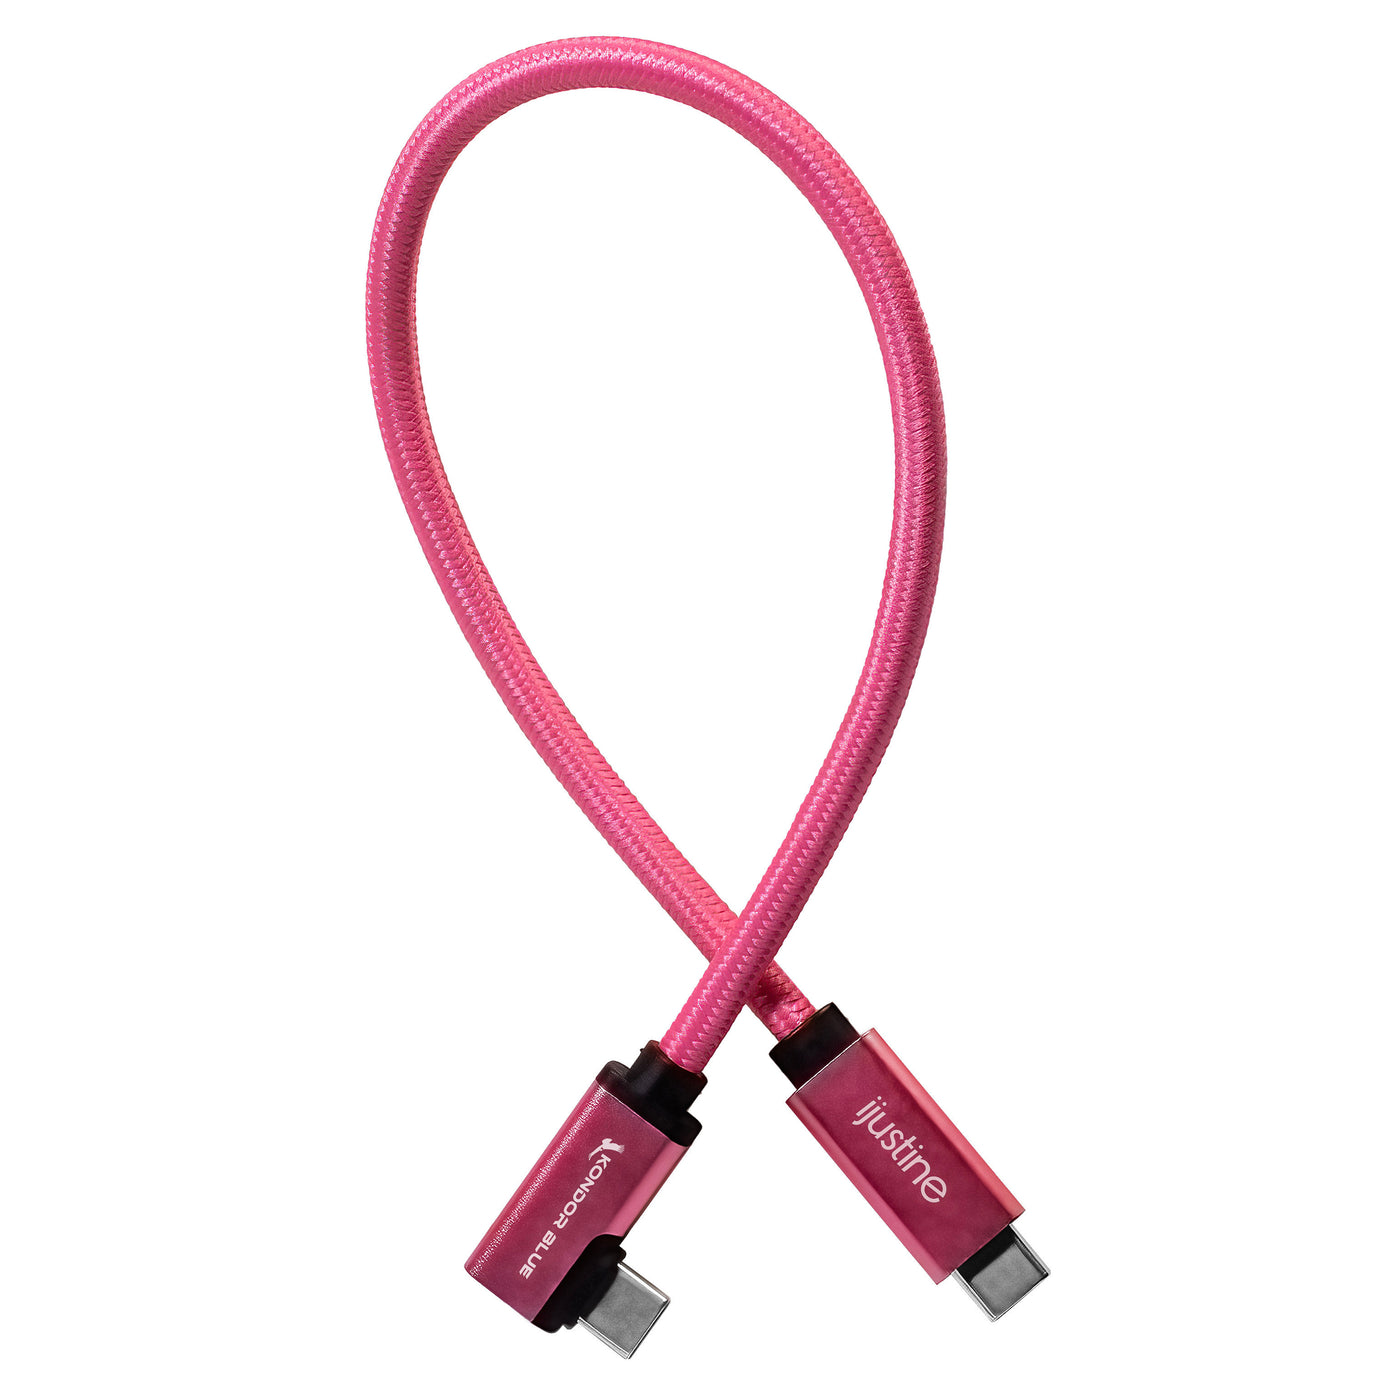 iJustine Pink USB C 3.1 Data and Charging Cable 10Gb/s Data Speed & 100W Power Delivery